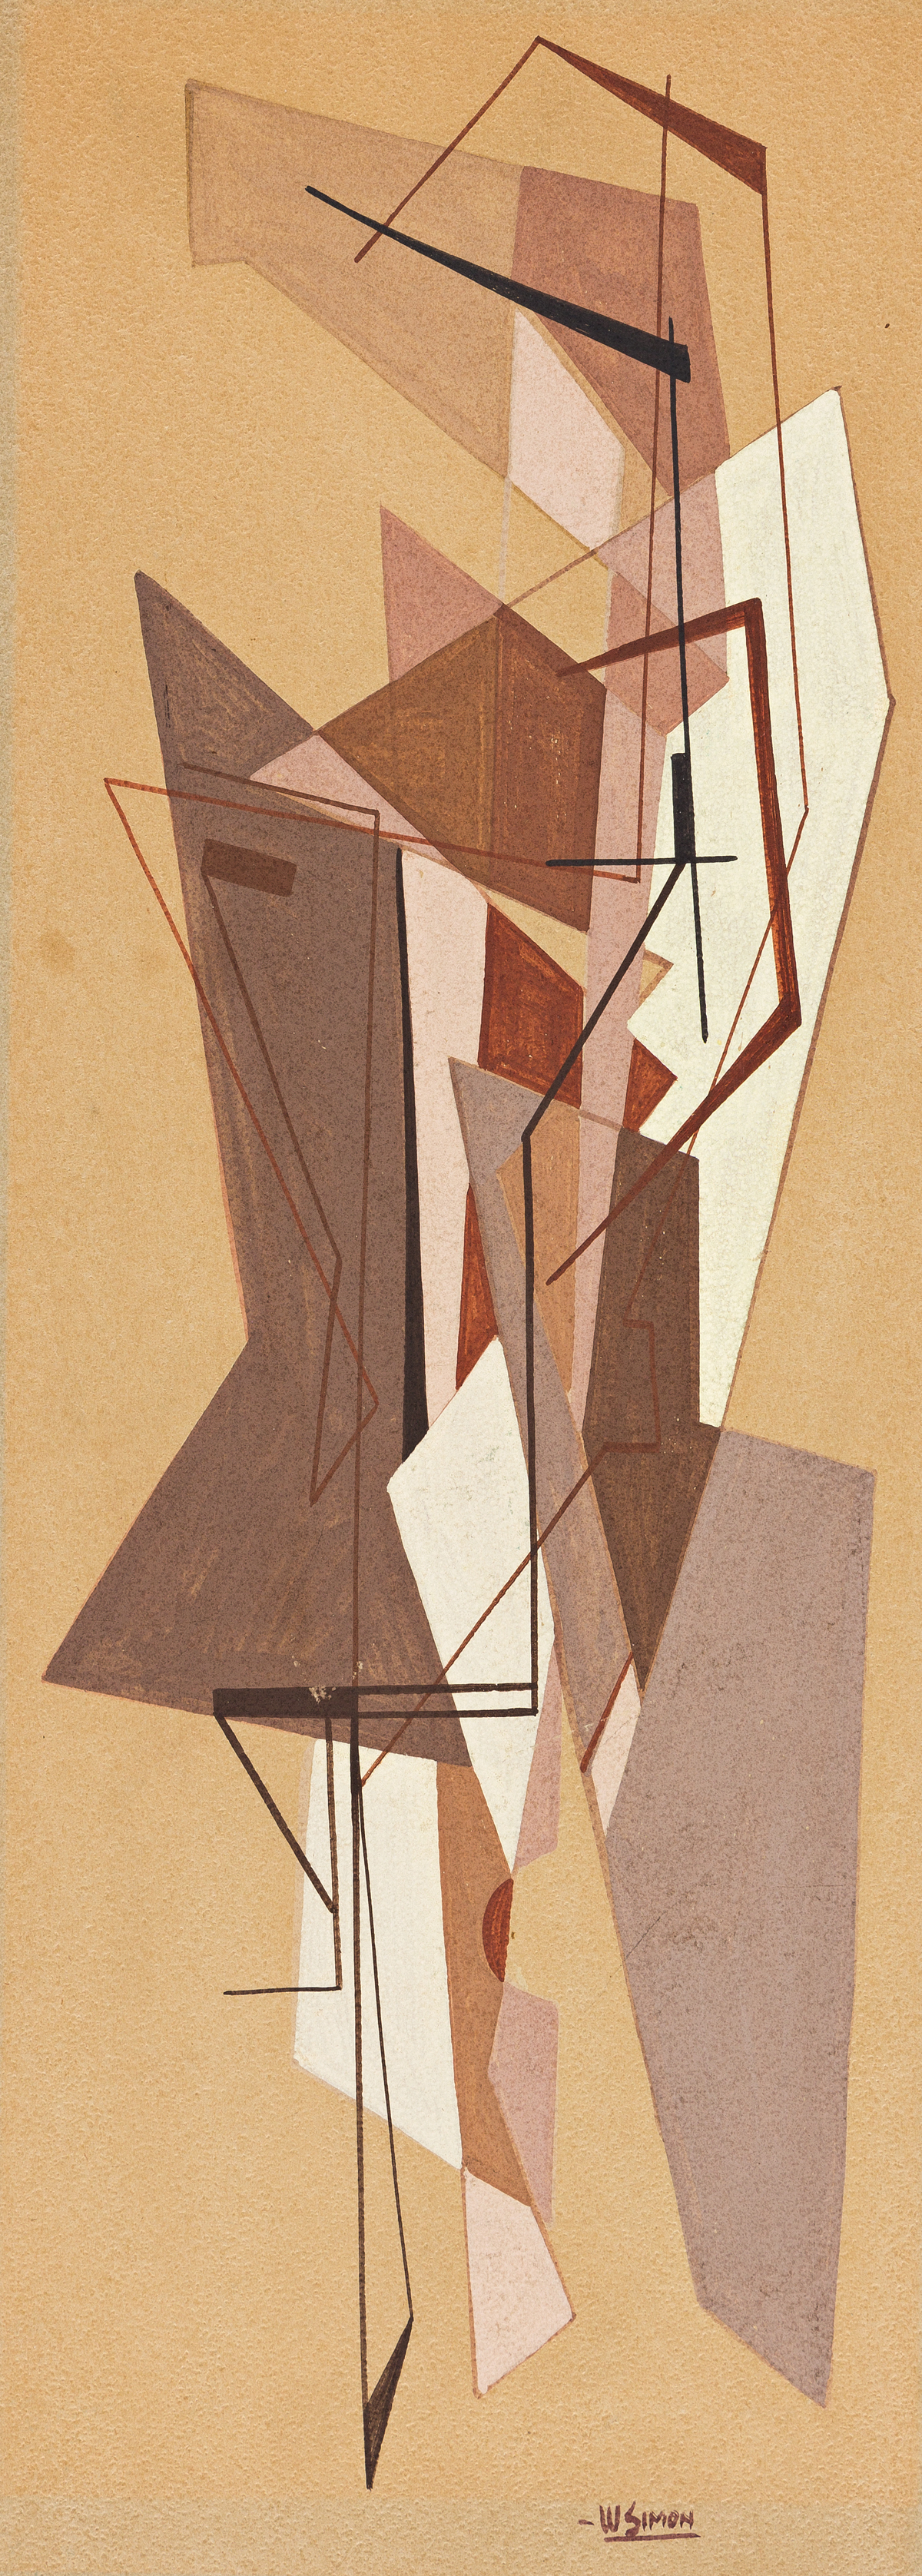 WALTER AUGUSTUS SIMON (1916 - 1979) Untitled (Study in Brown).